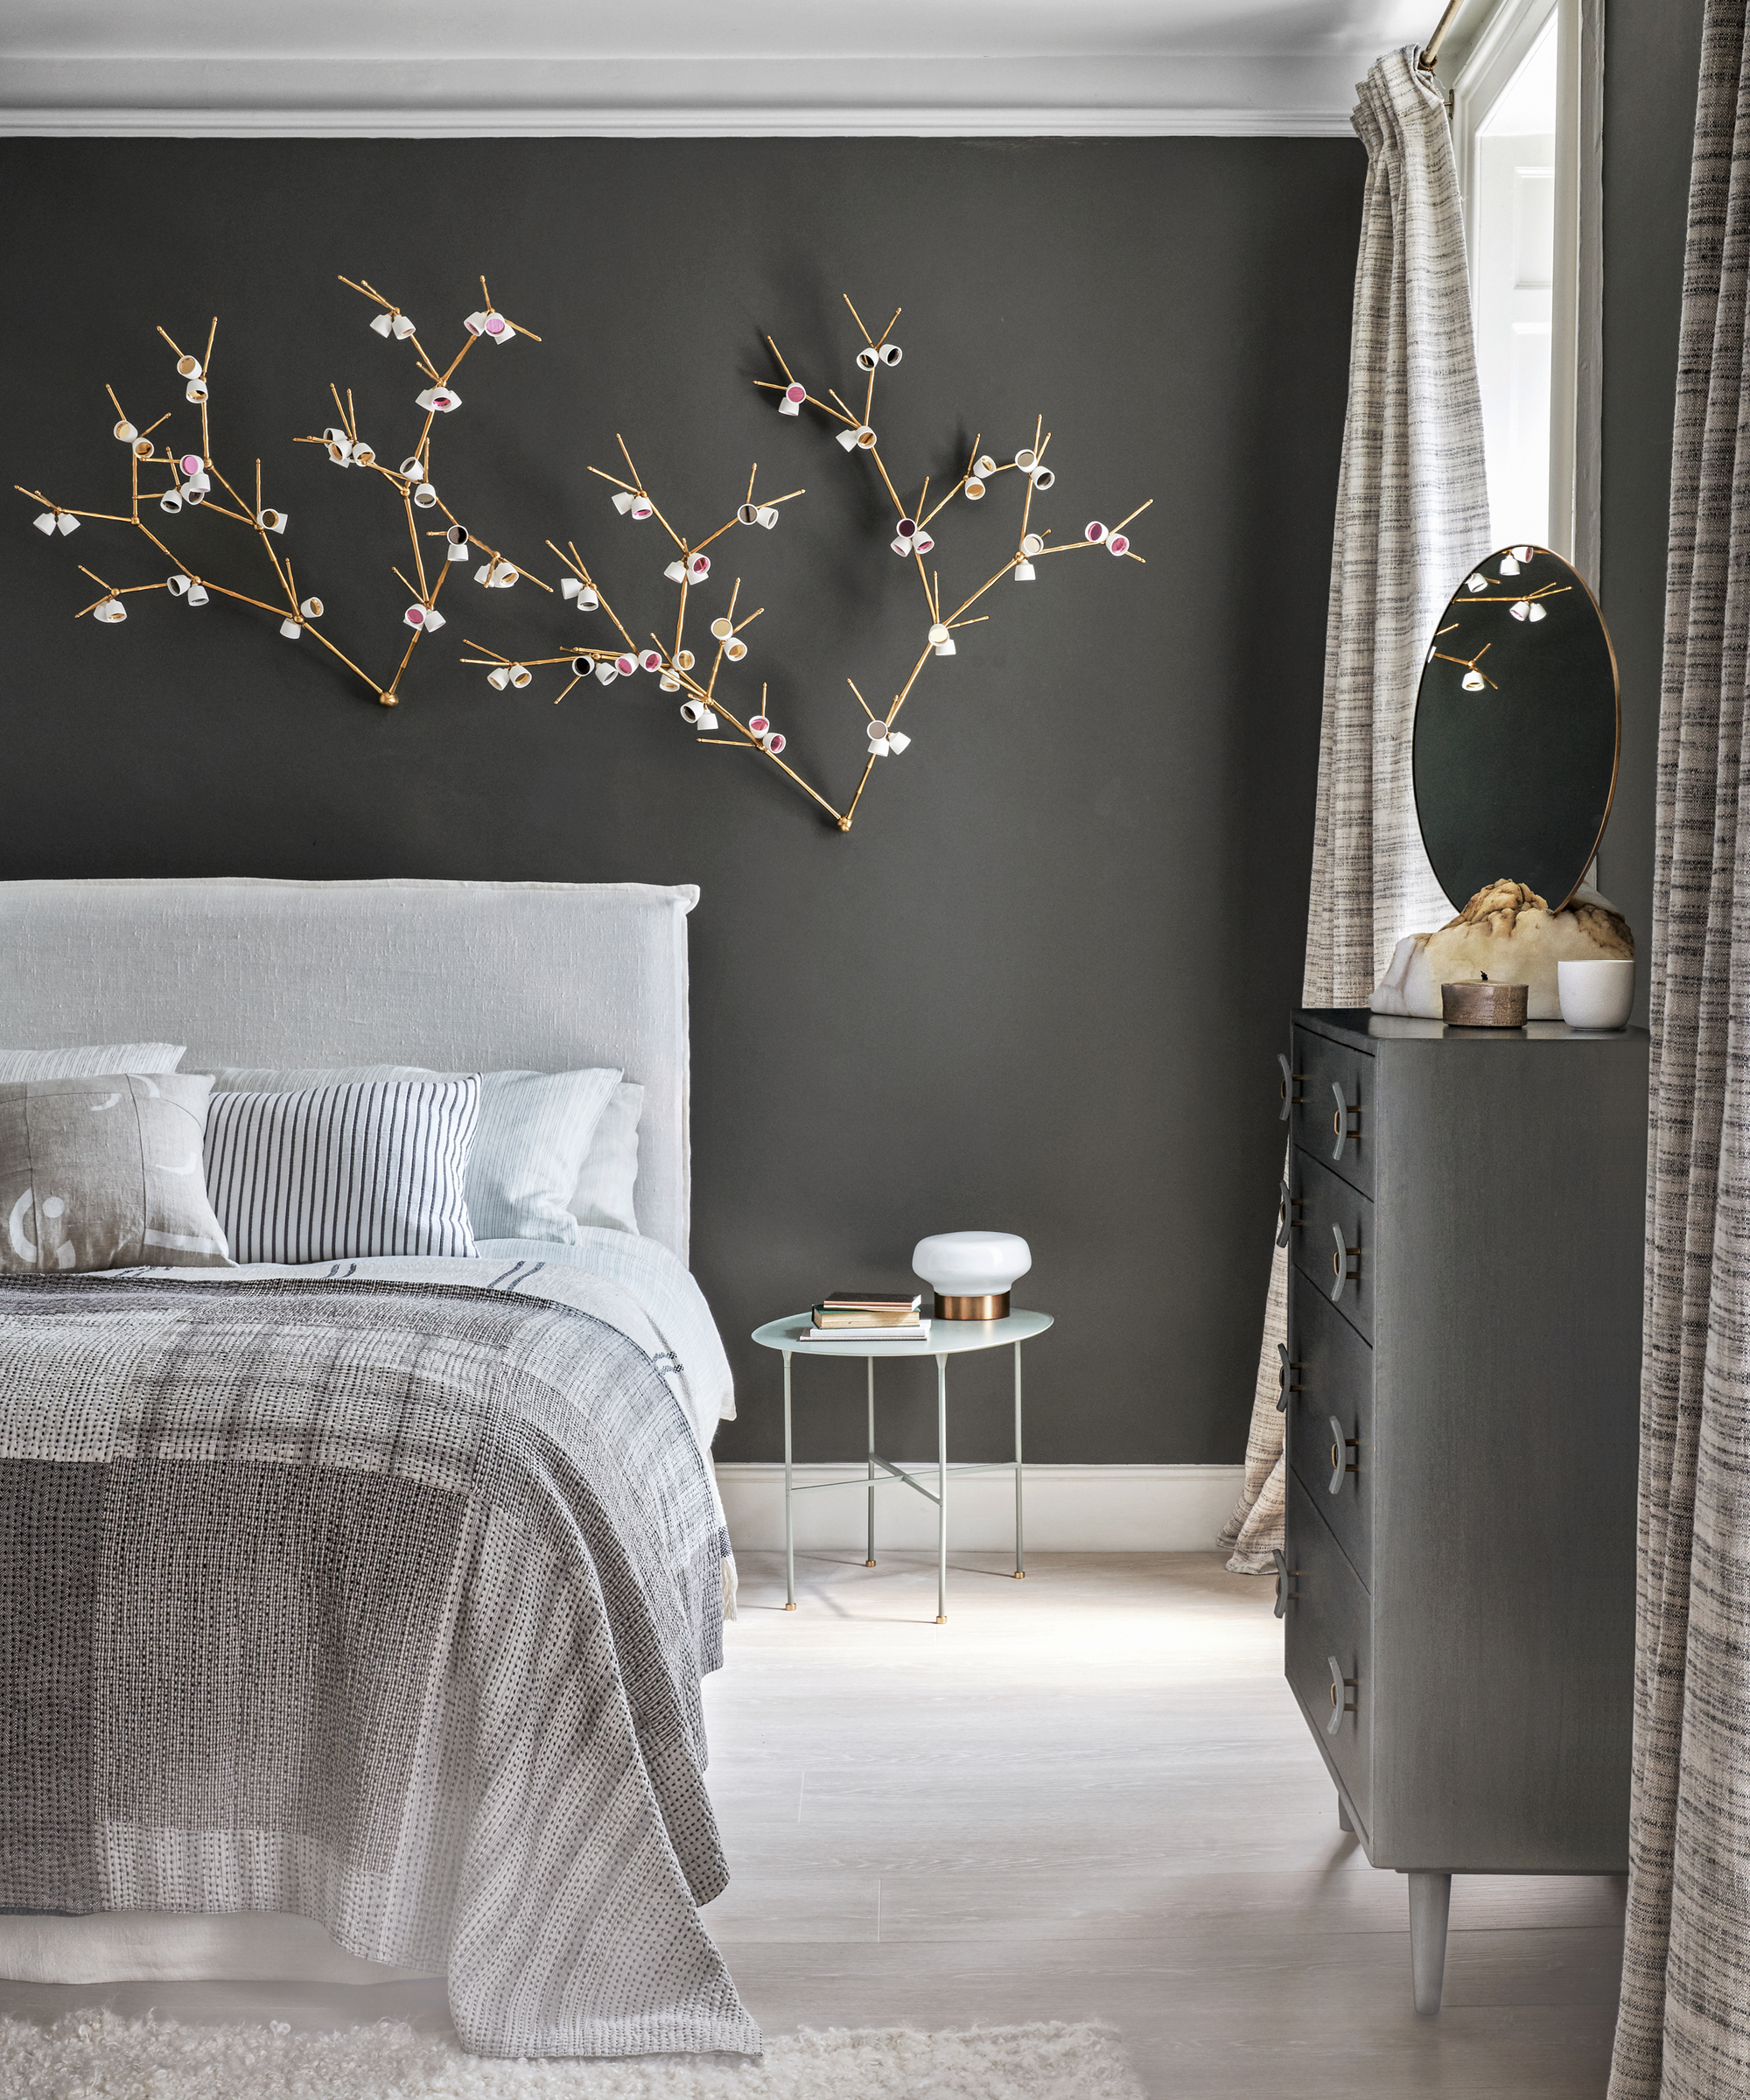 A grey bedroom idea with dark grey walls, a nature inspired light installation and grey wooden floors